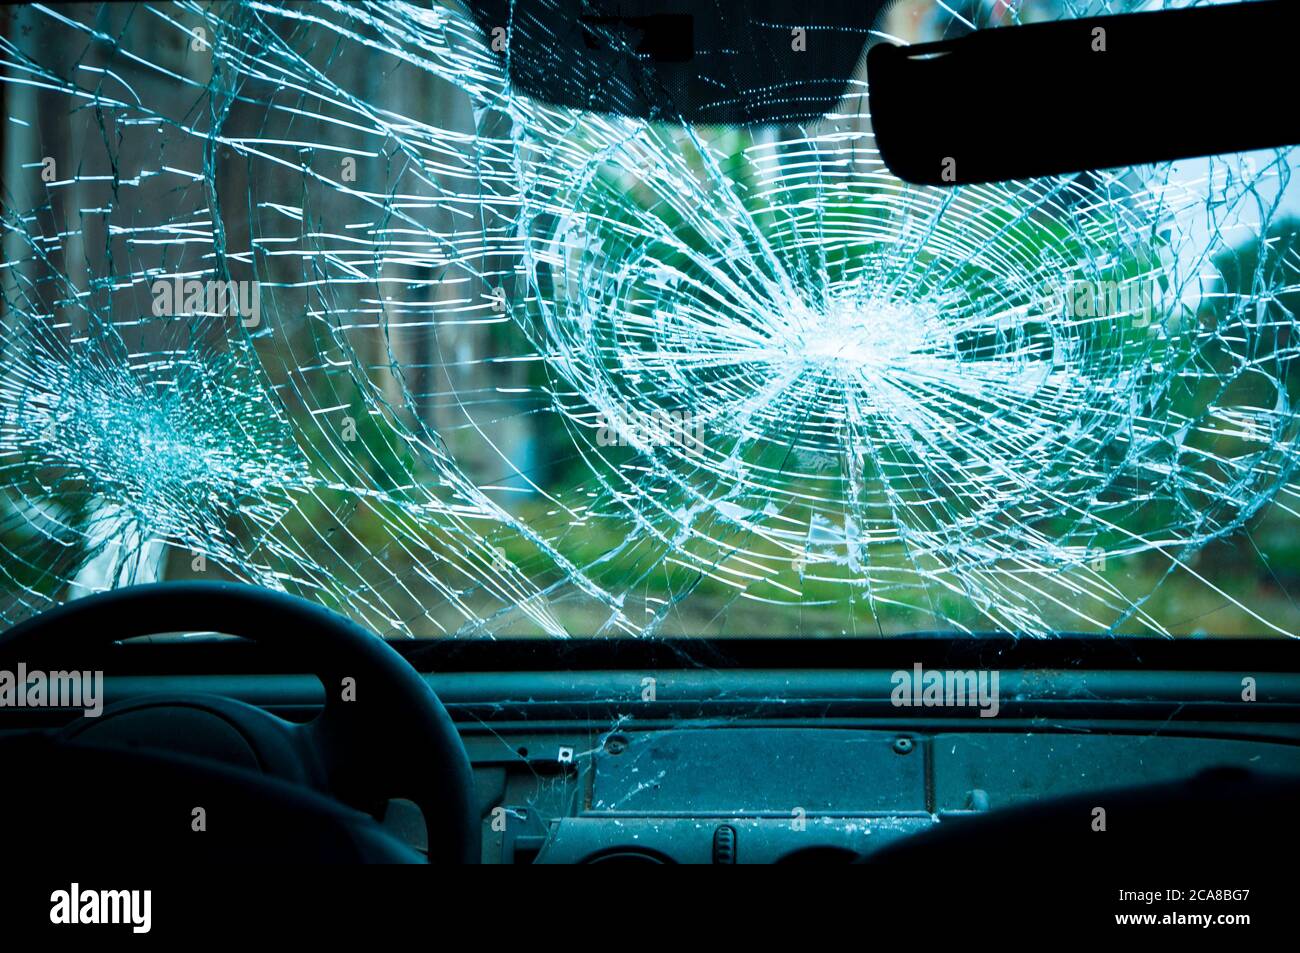 inside view of a car with a smashed windshield Stock Photo